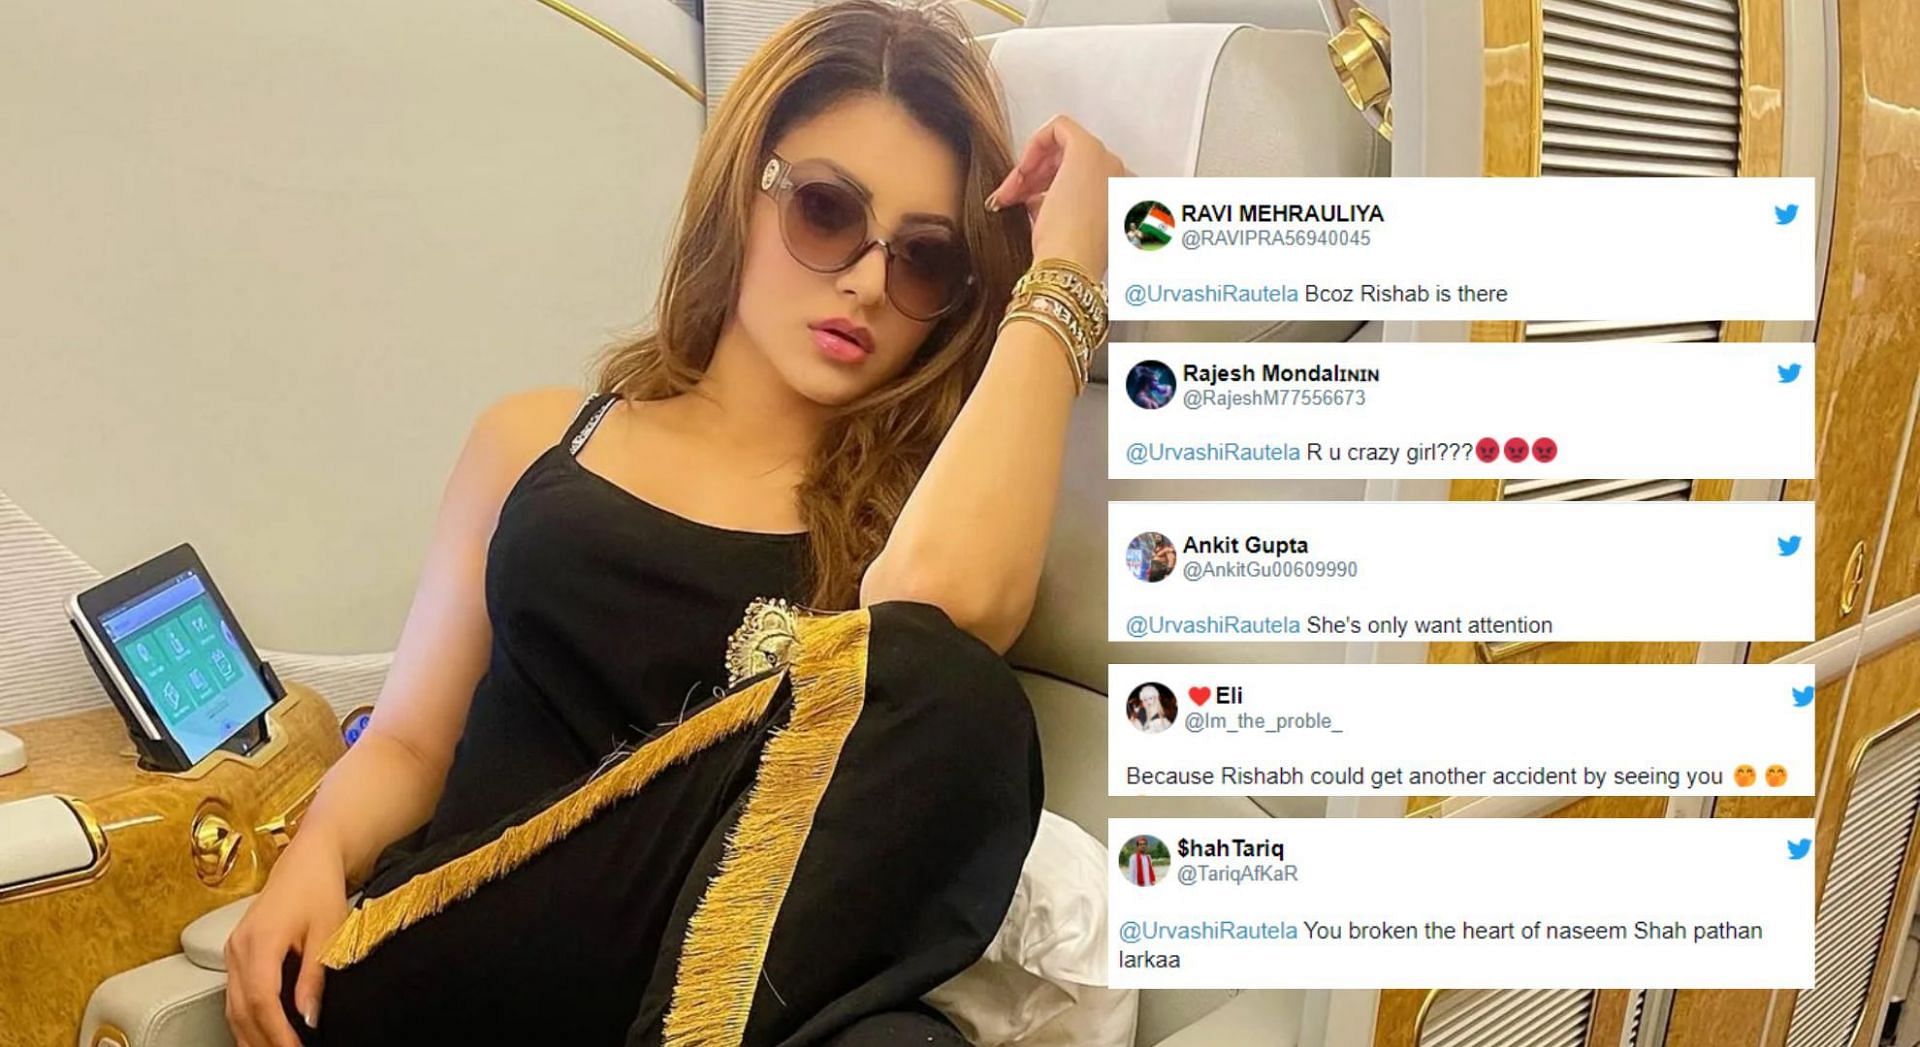 “Bcoz Rishabh (Pant) is there” – Fans react hilariously to Urvashi Rautela’s latest Instagram post